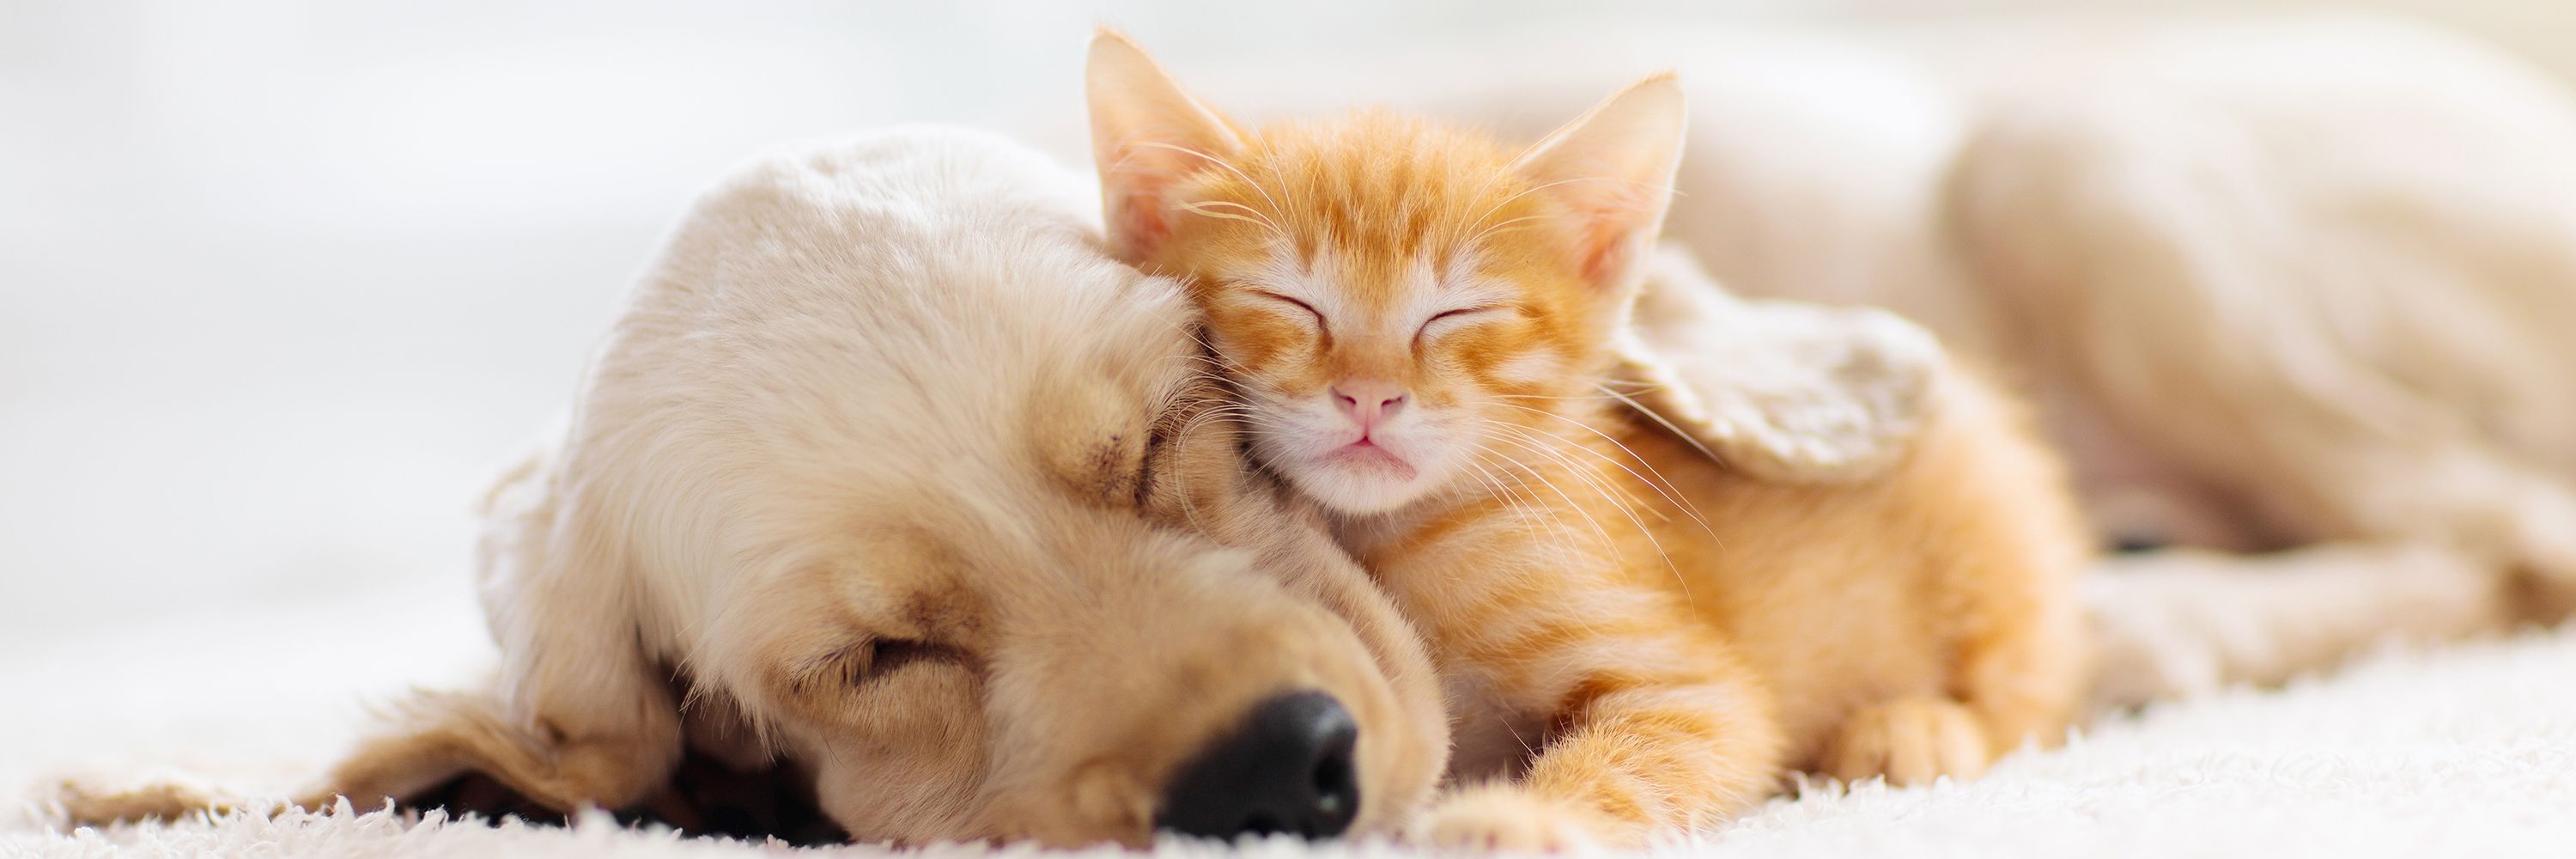 Puppy laying with kitten